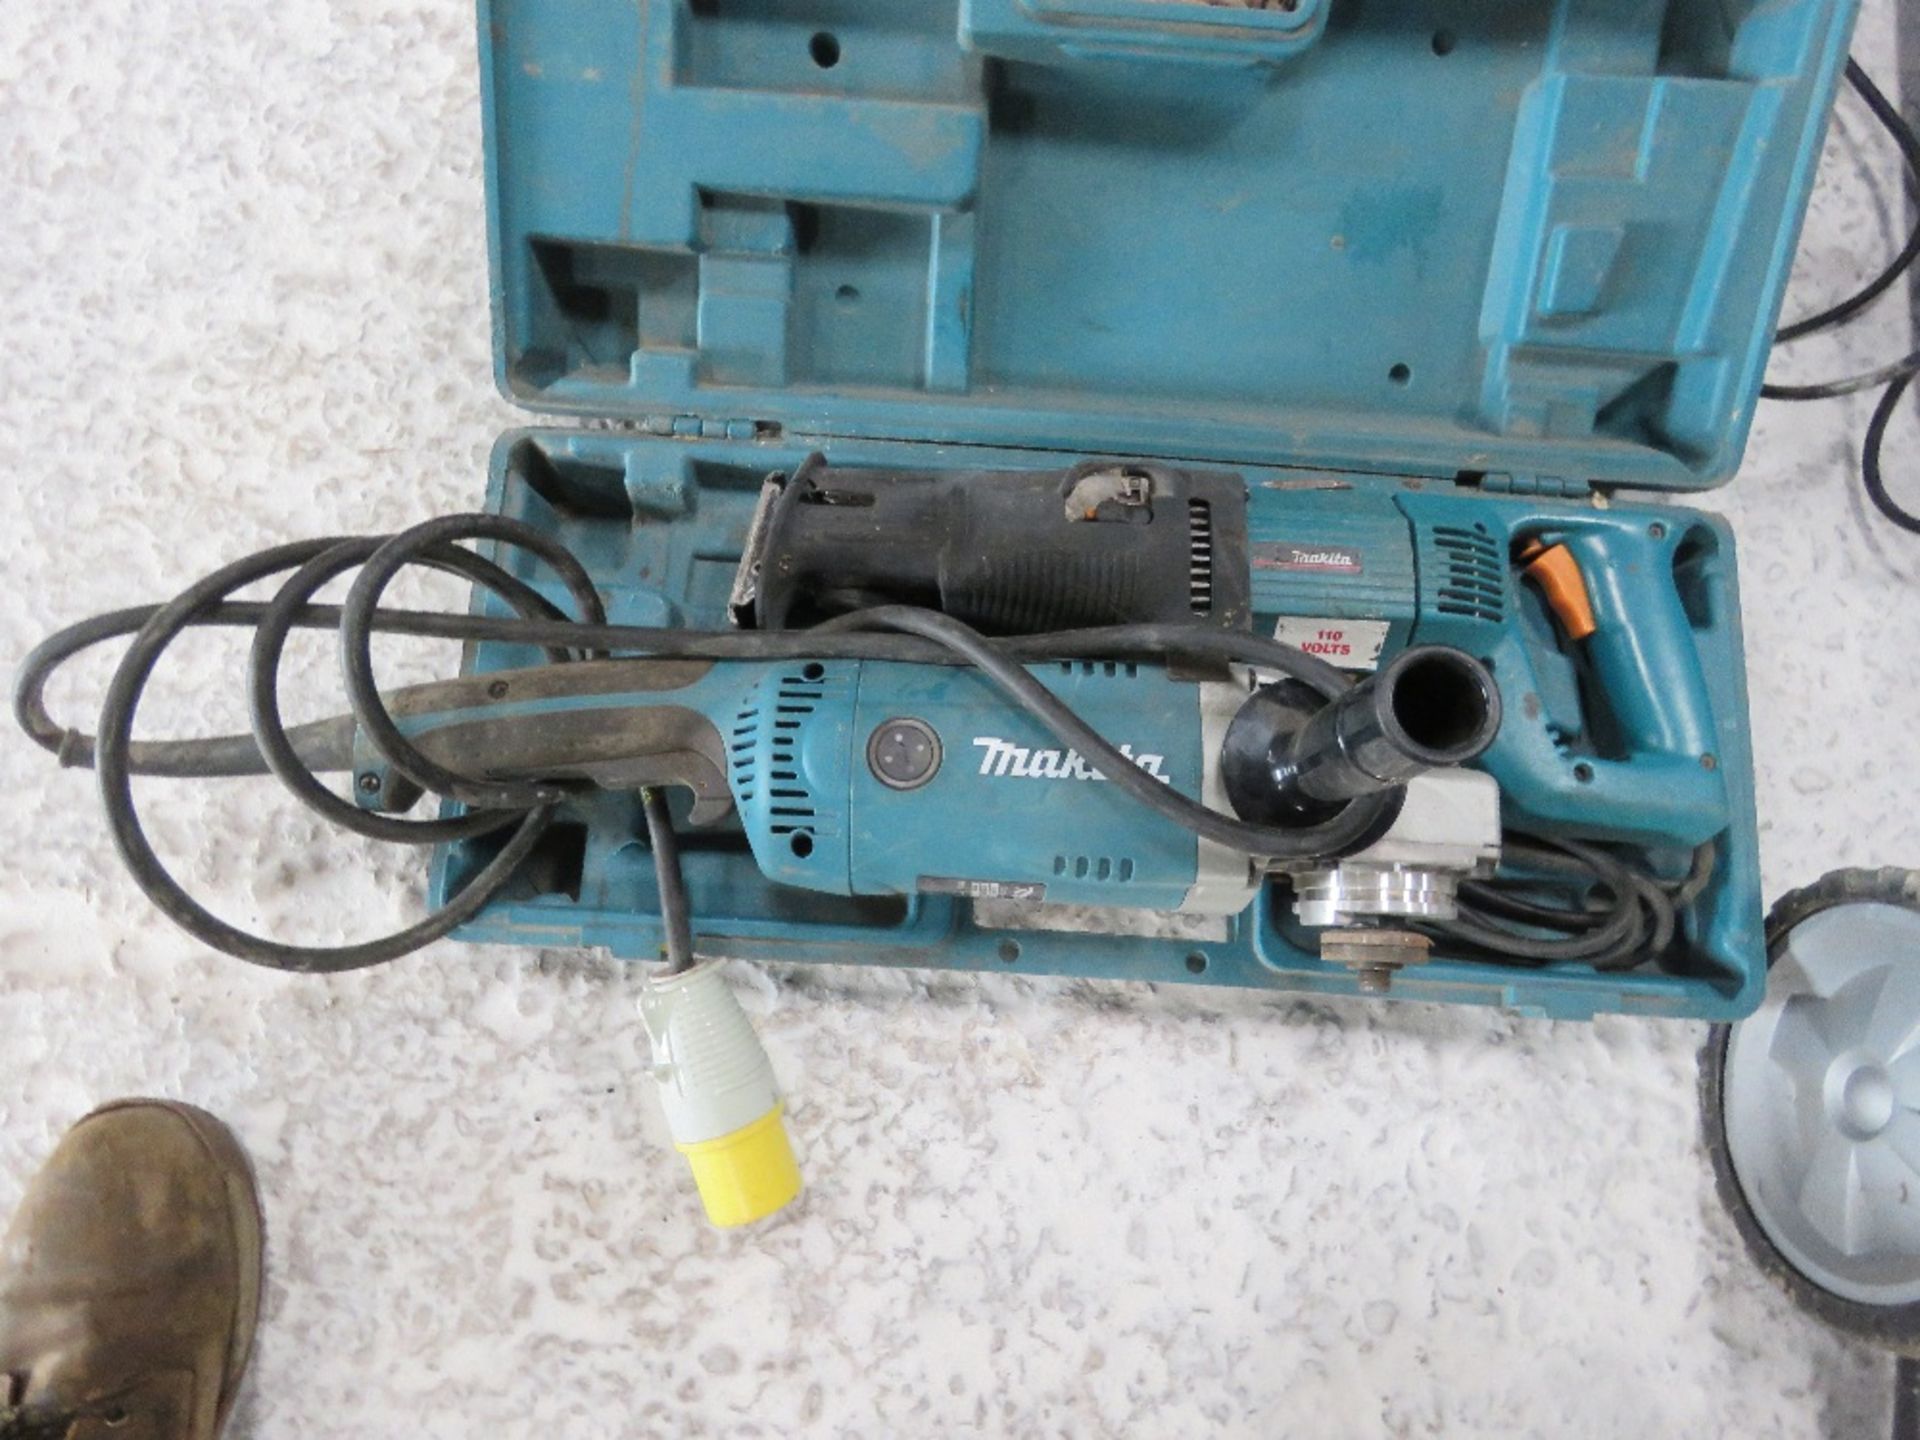 MAKITA 110VOLT GRINDER PLUS A RECIPROCATING SAW.....THIS LOT IS SOLD UNDER THE AUCTIONEERS MARGIN SC - Bild 3 aus 3